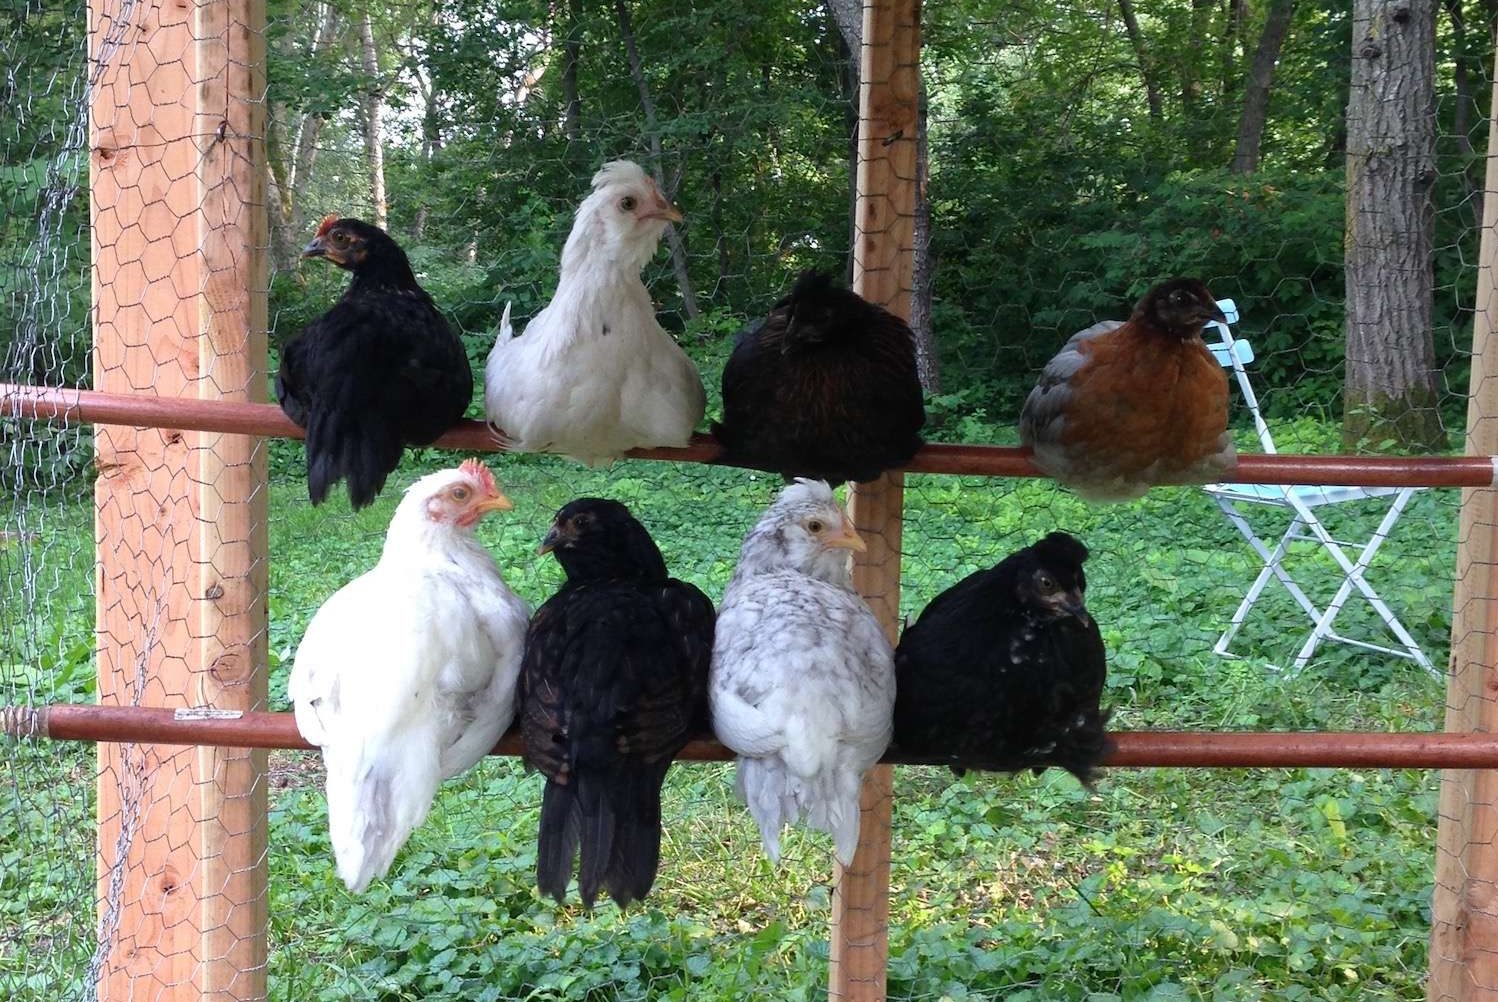 8 pullets and cockerels roosting in a chicken tractor